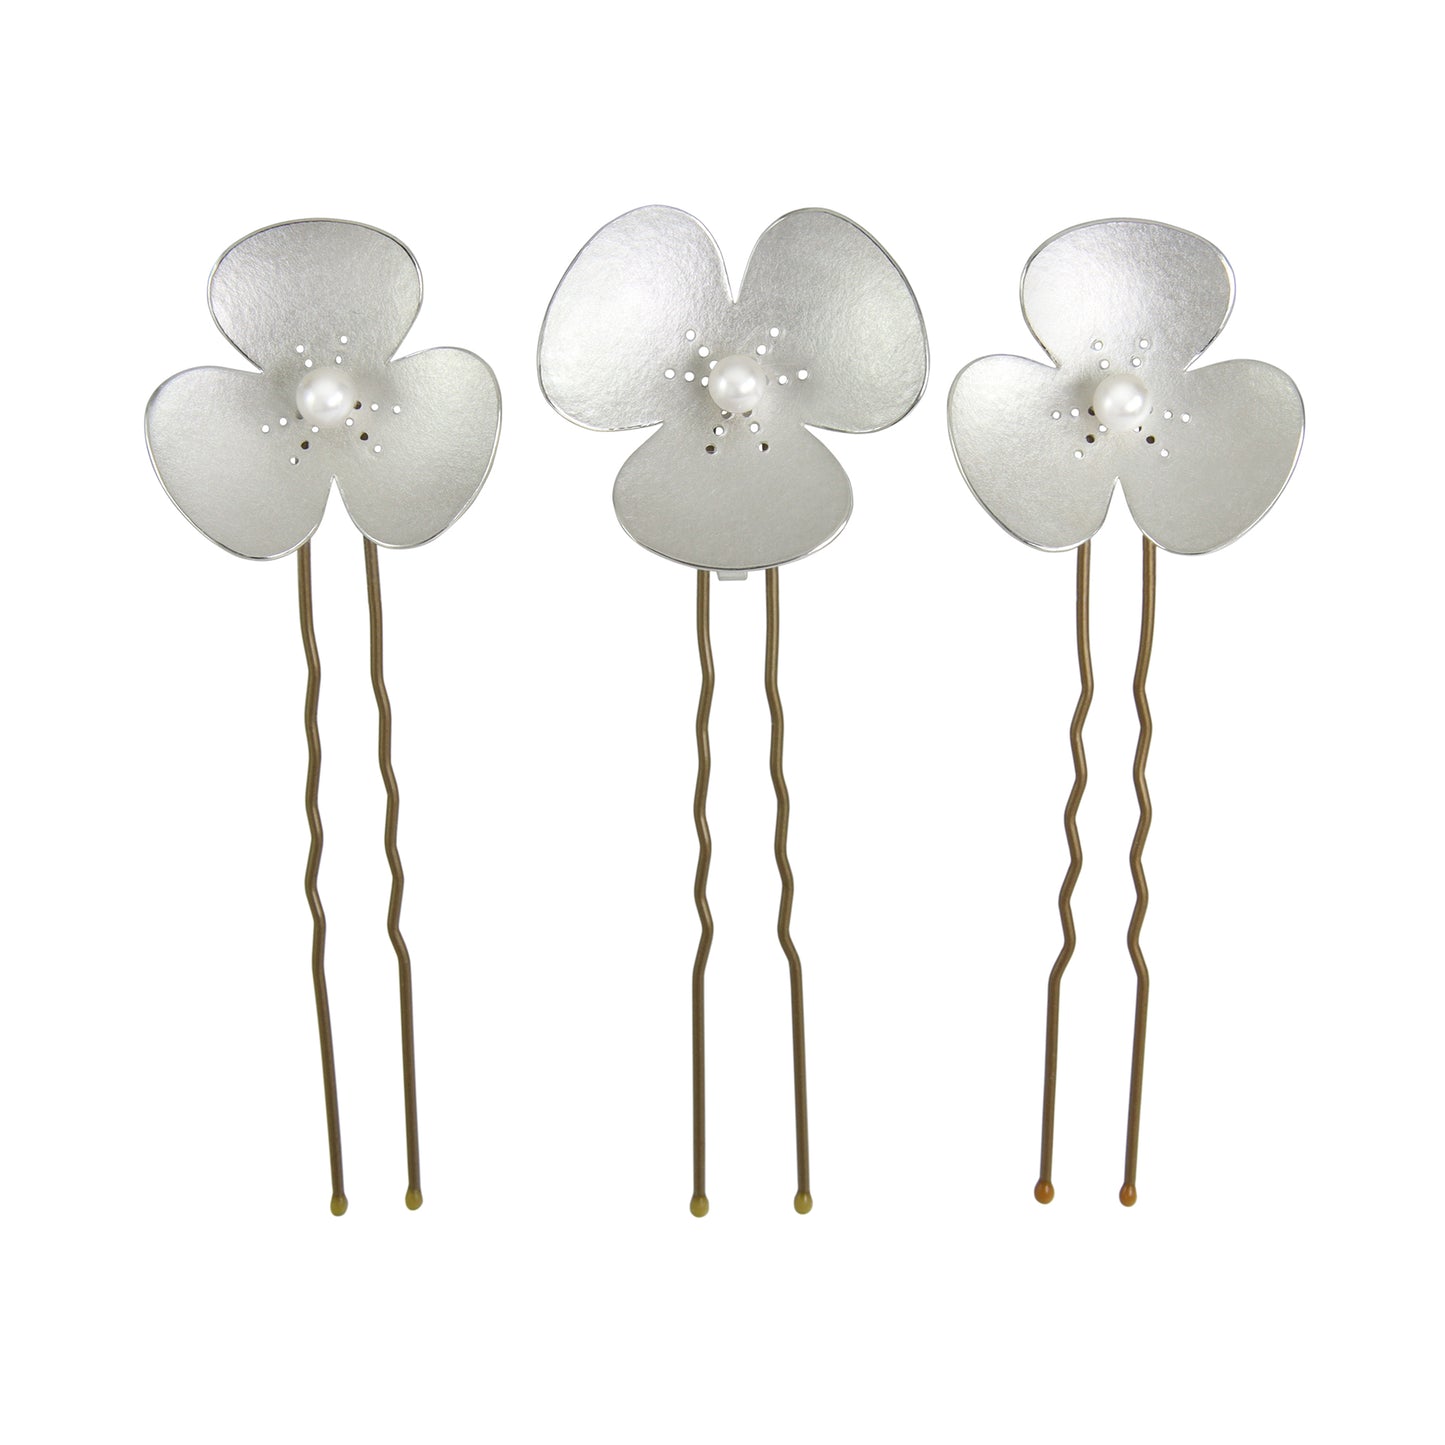 Three Silver and Pearl Poppy hairpins, which instantly convert to a set of jewellery